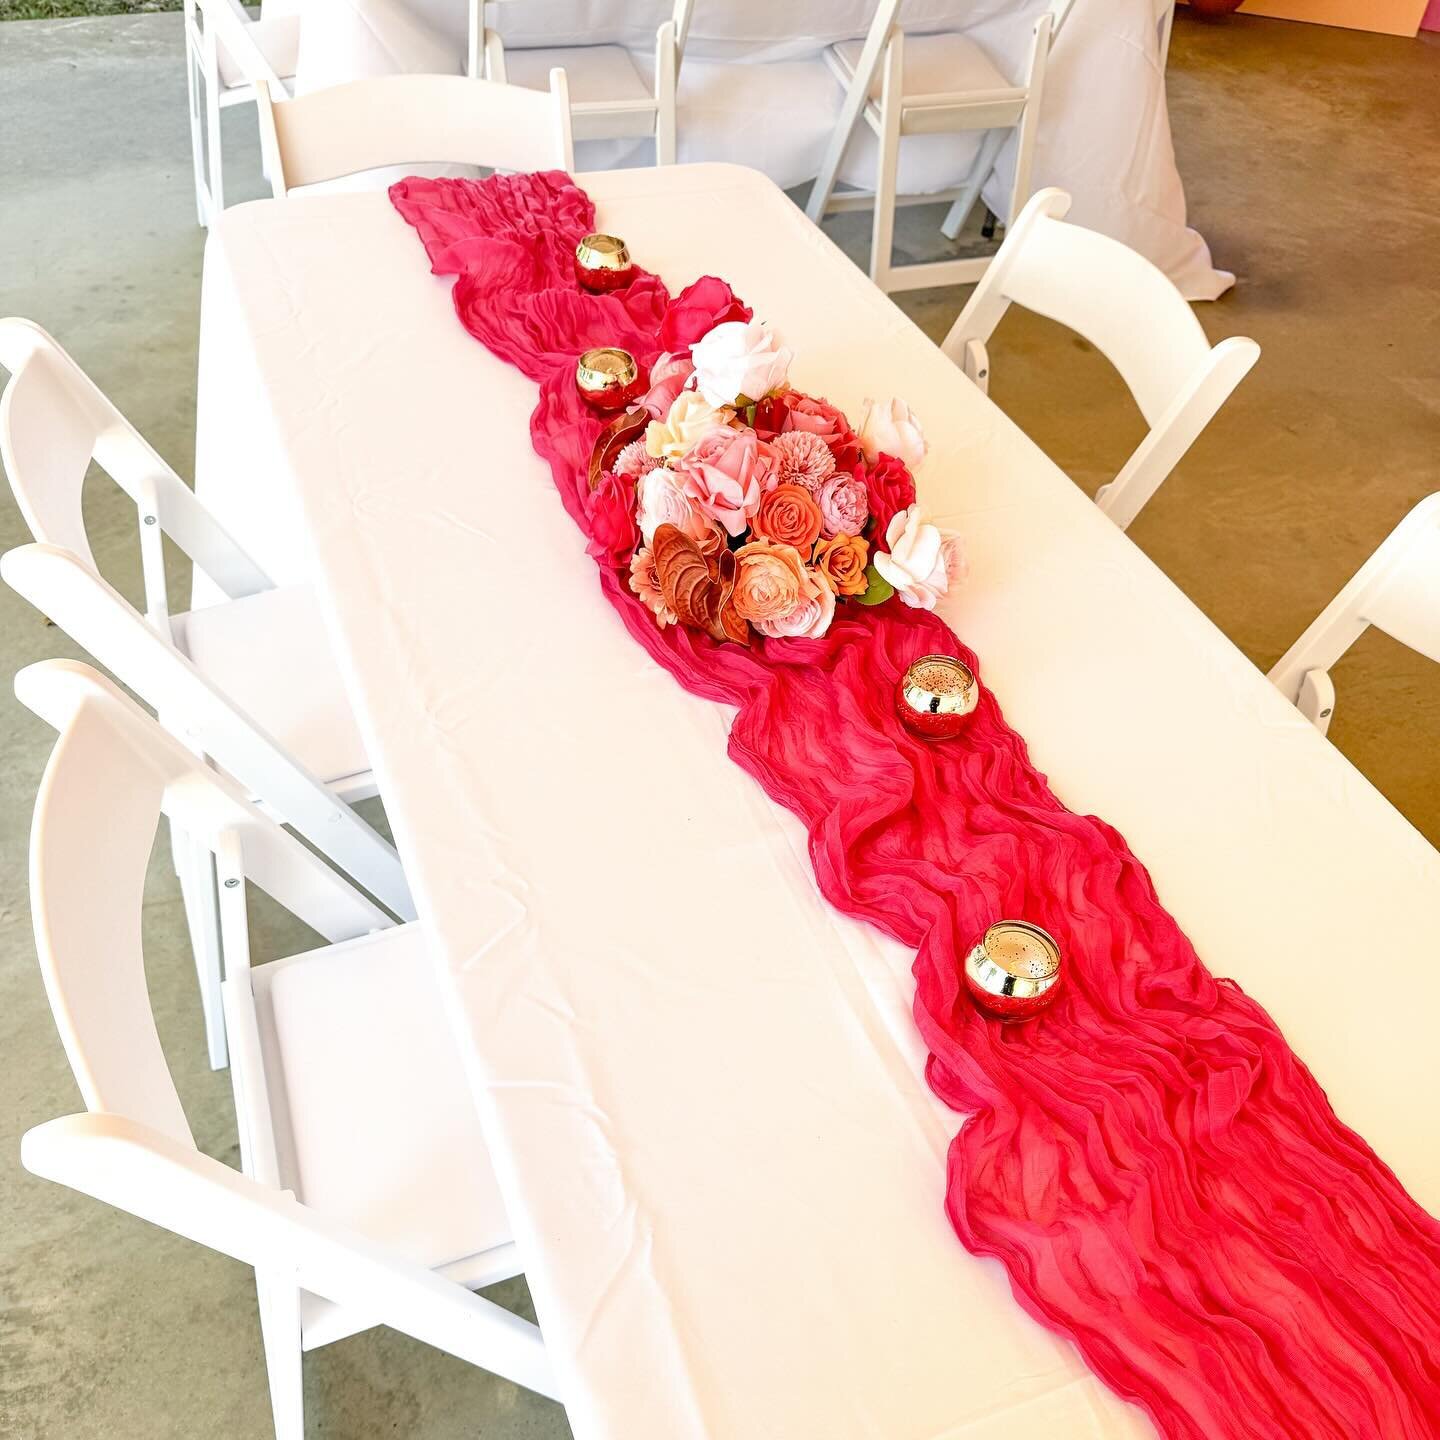 Did you know that we also offer 6ft Tables and Chair Rentals!? 

6ft Tables &amp; Chairs, Polyester table covers, Table runners, and Centerpieces by @theballoonaireclub